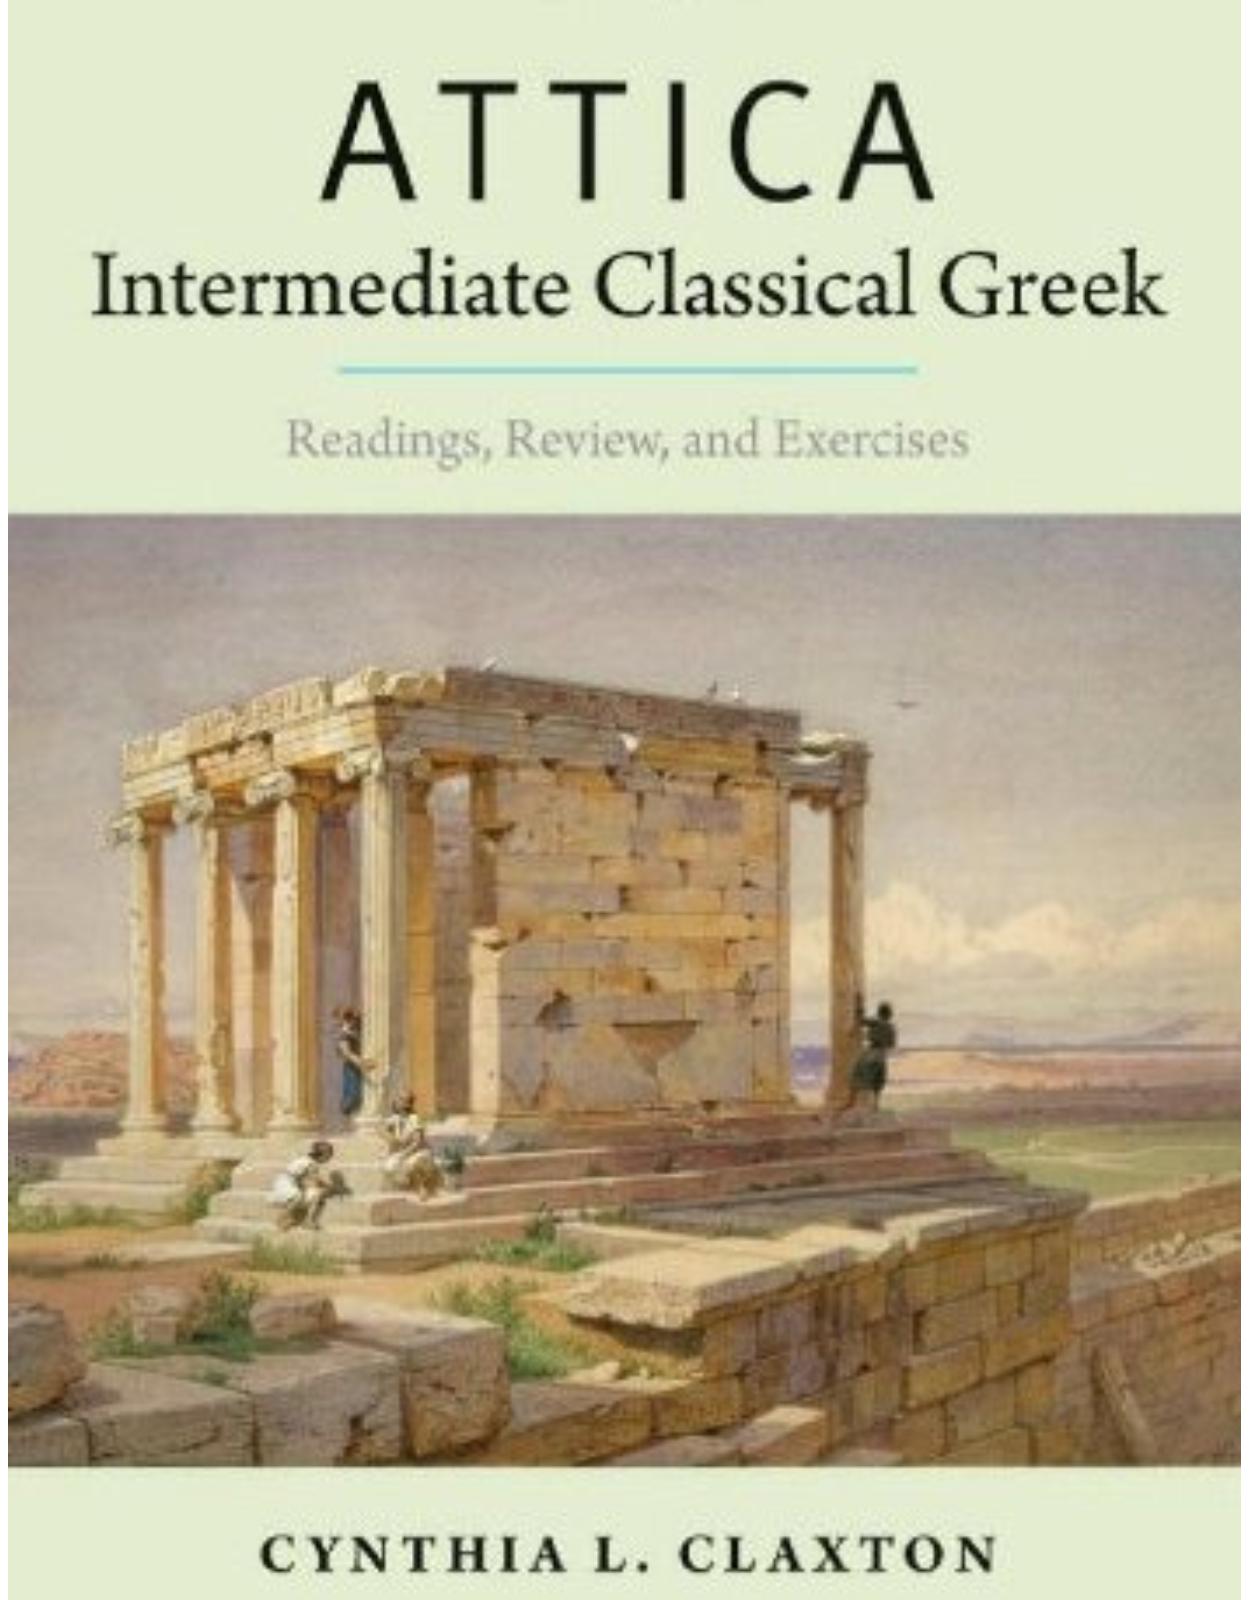 Attica: Intermediate Classical Greek. Readings, Review, and Exercises